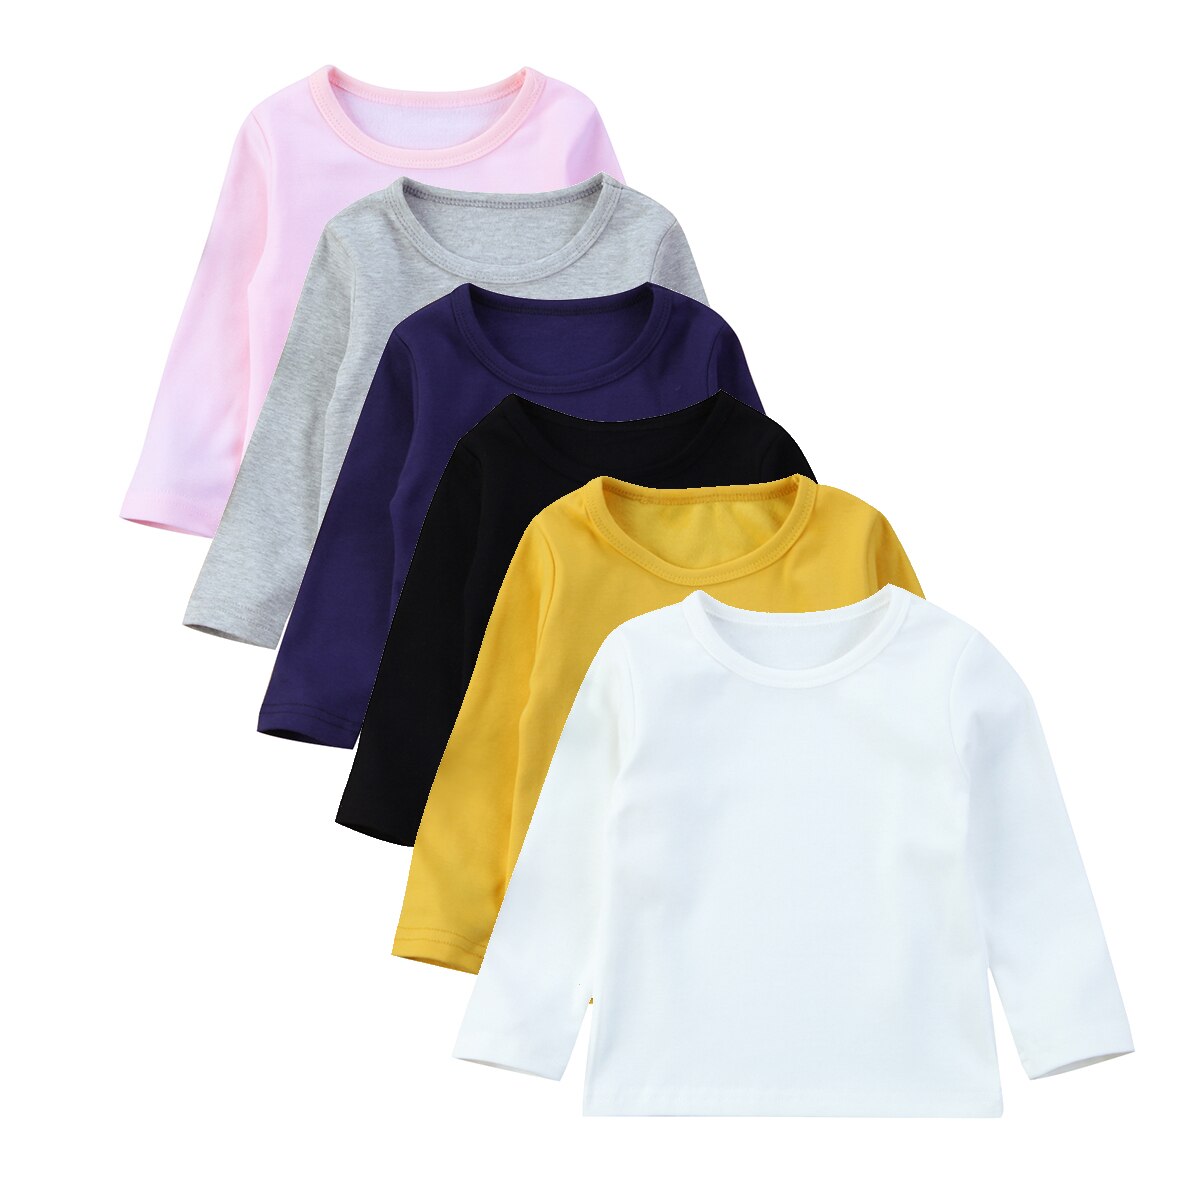 Kids Assorted Tops (Pack of 3) Full Sleeves - Hinz Knit